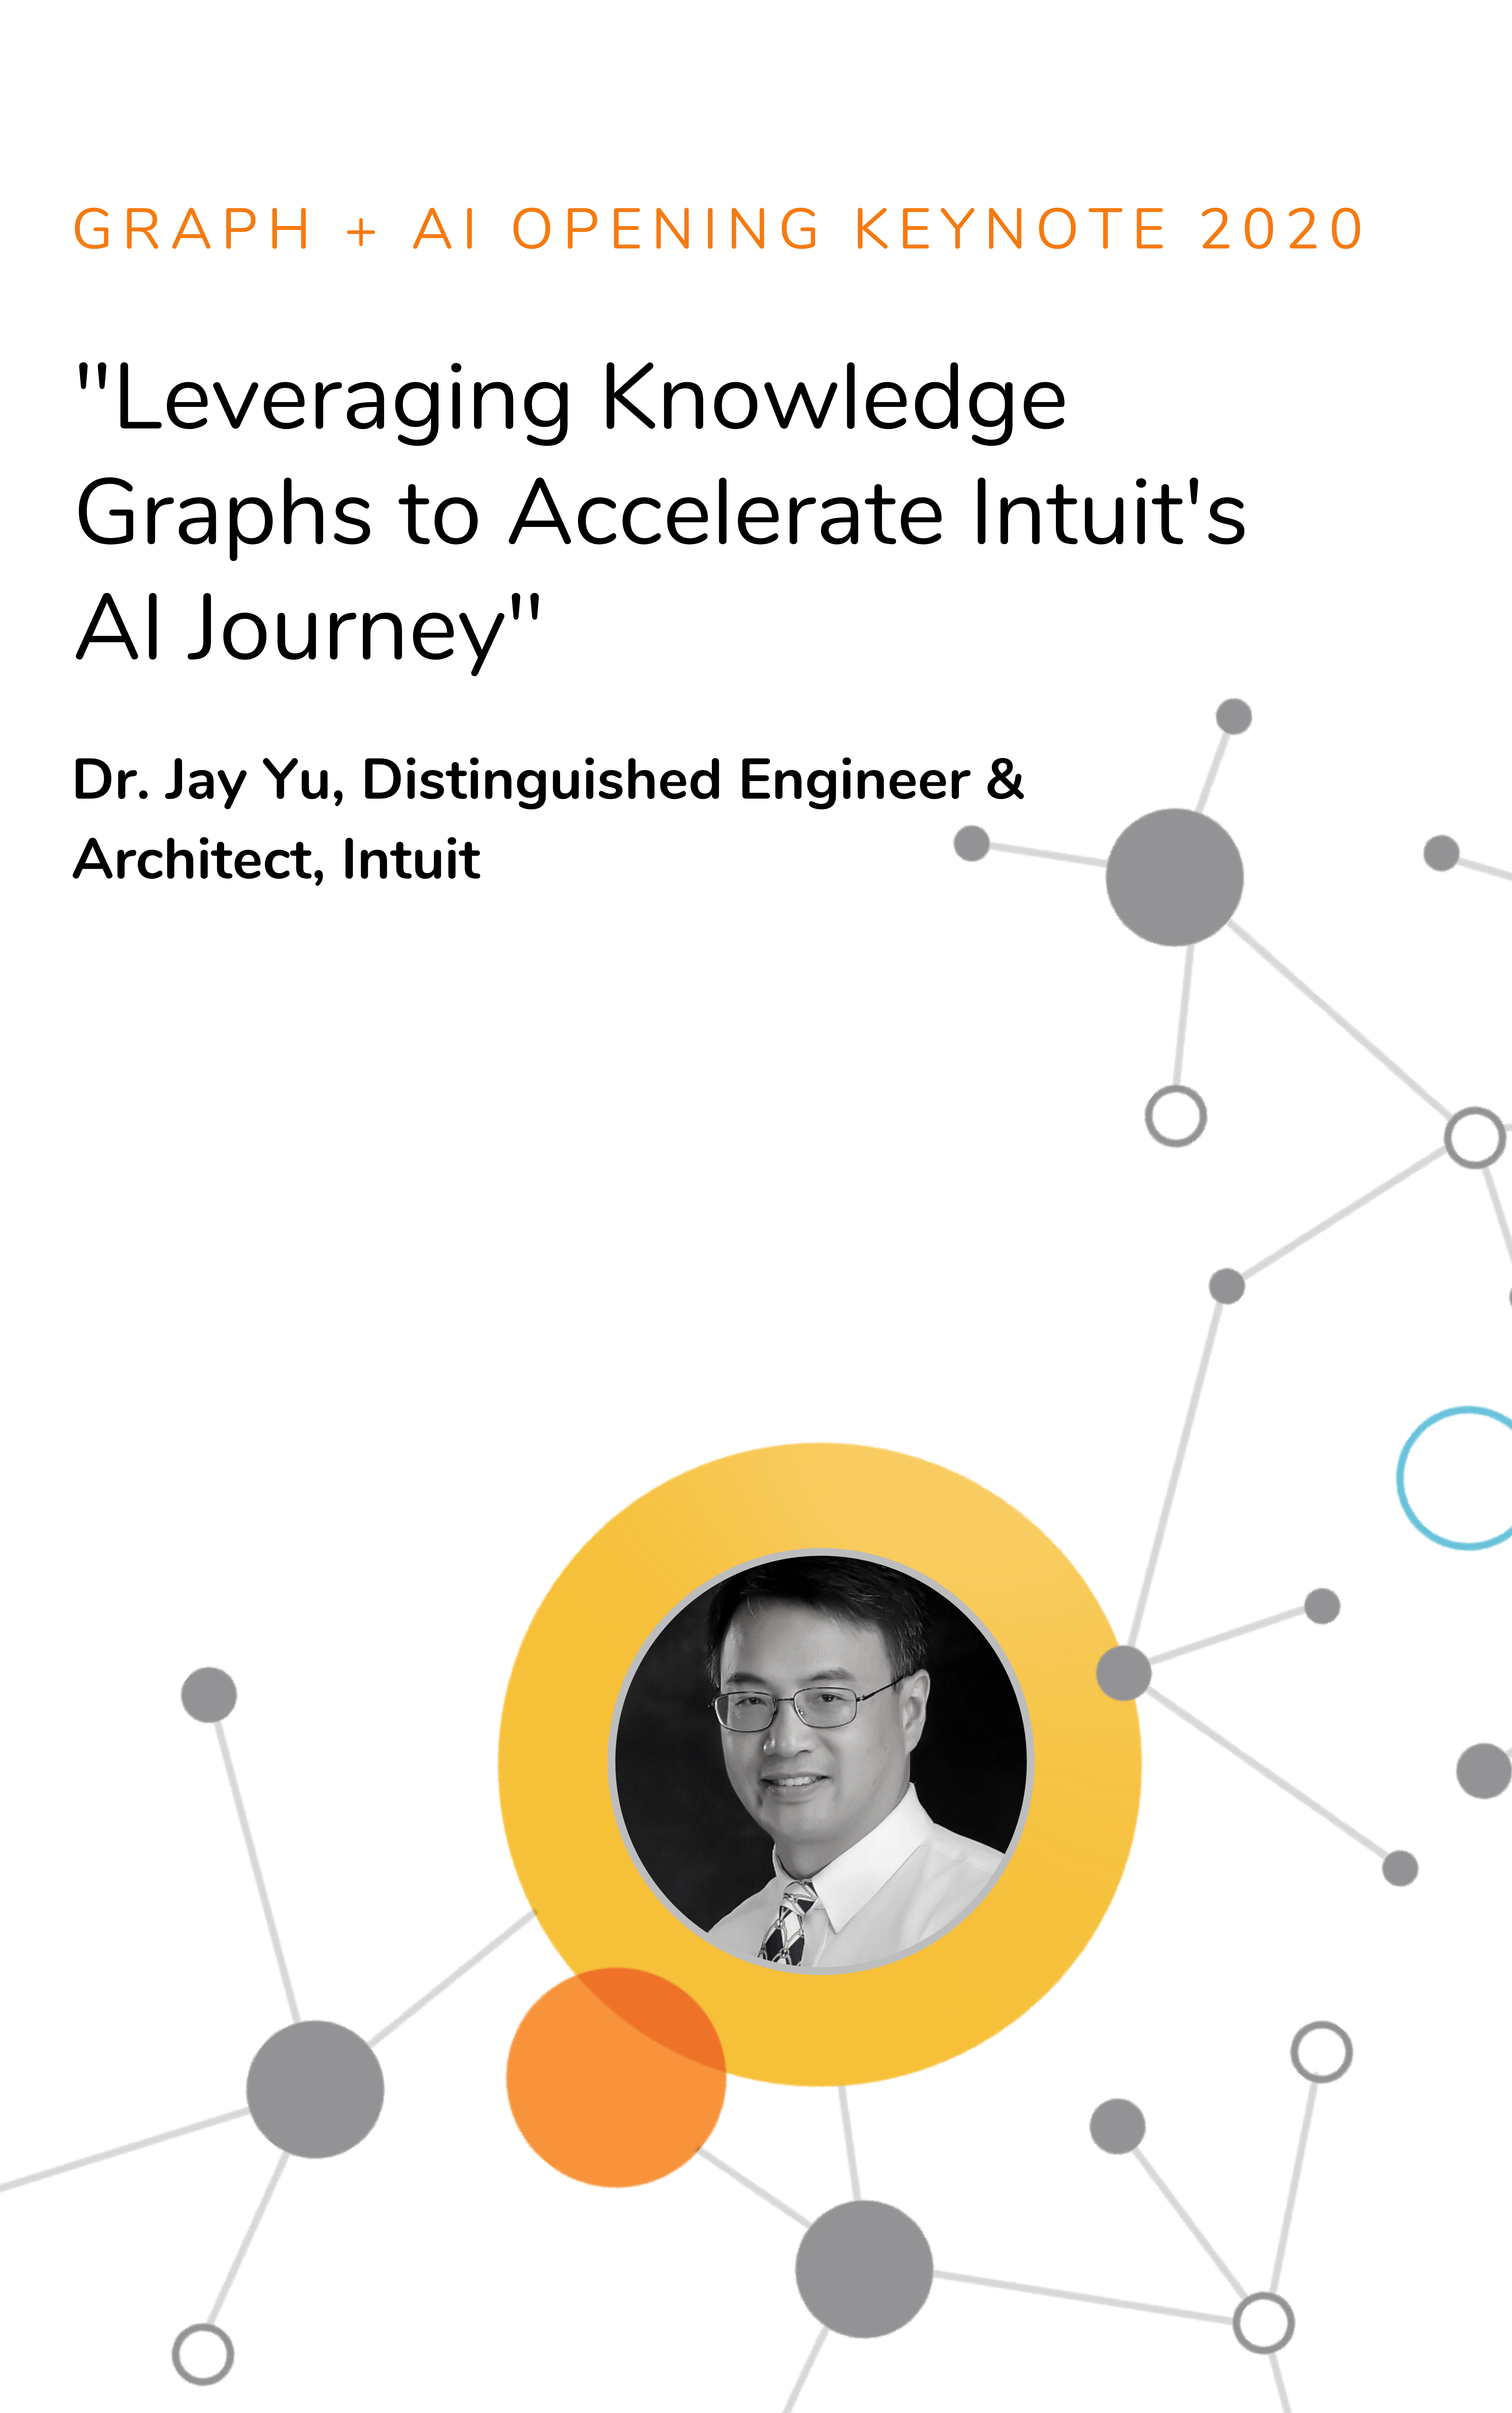 Dr. Jay Yu, Intuit